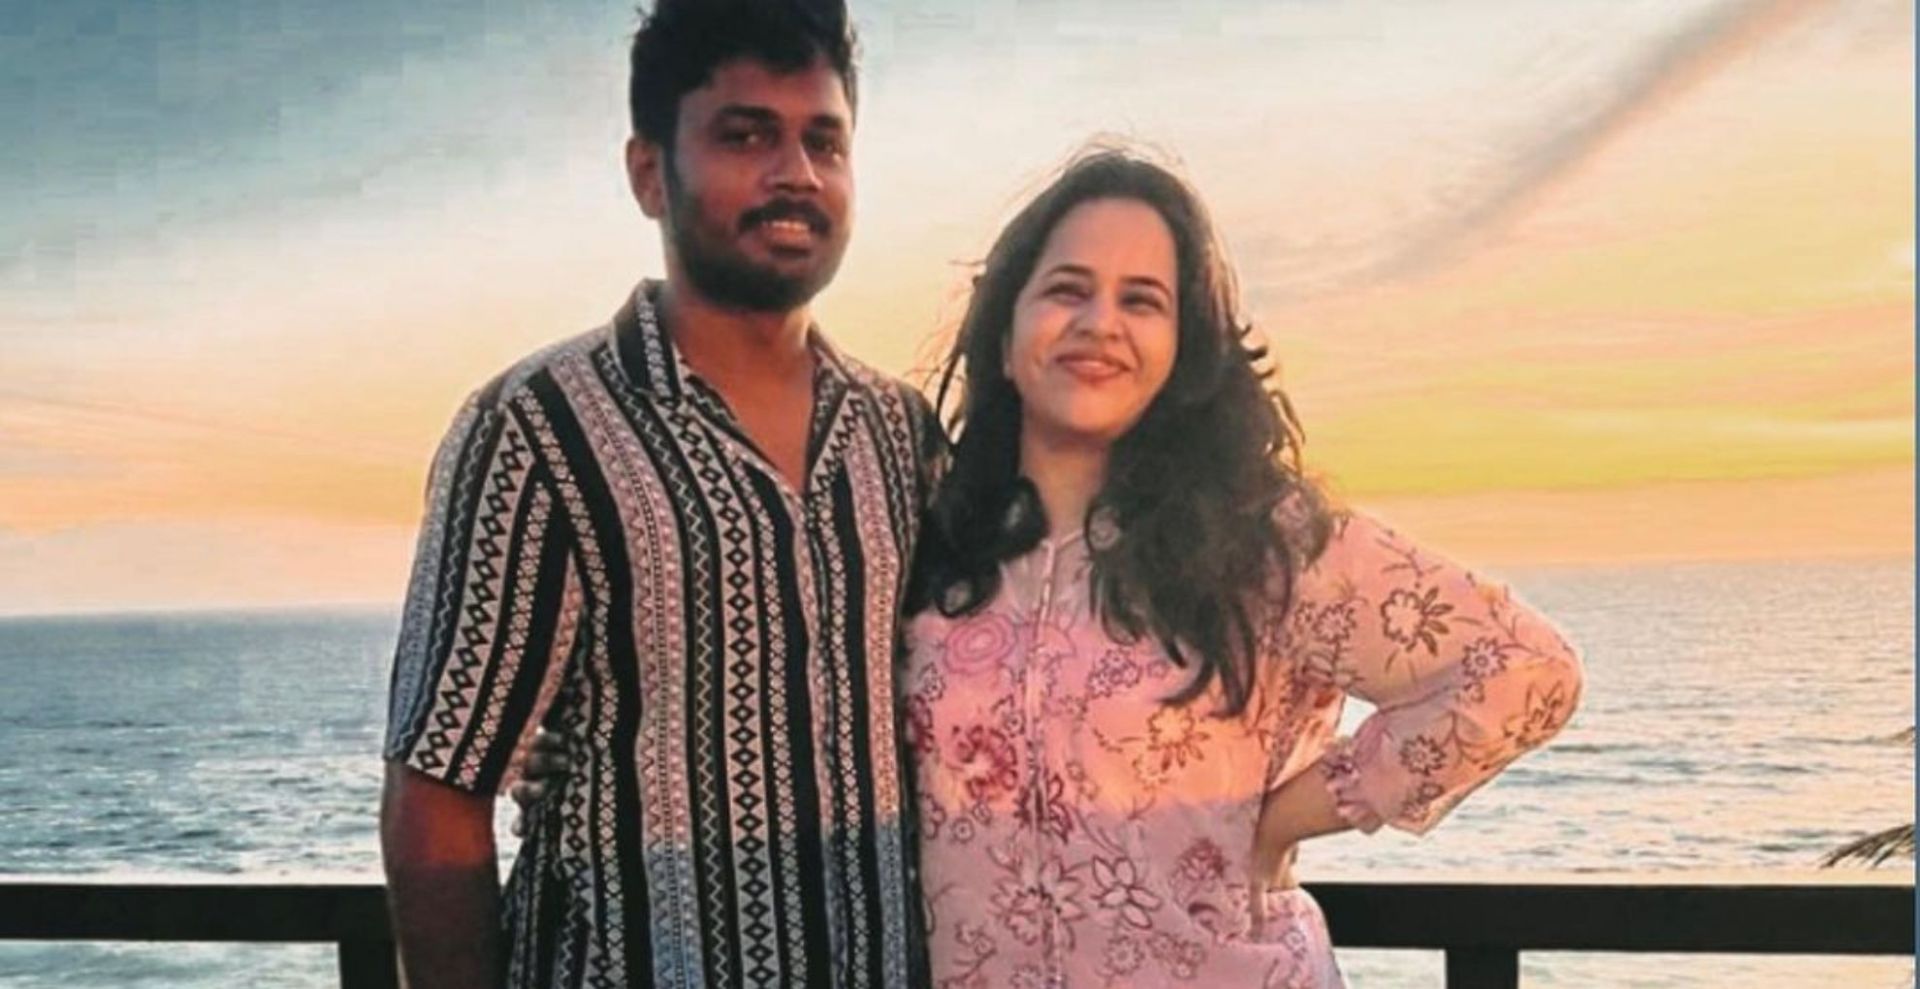 Sanju Samson poses for a picture with his wife (Credits: Instagram)